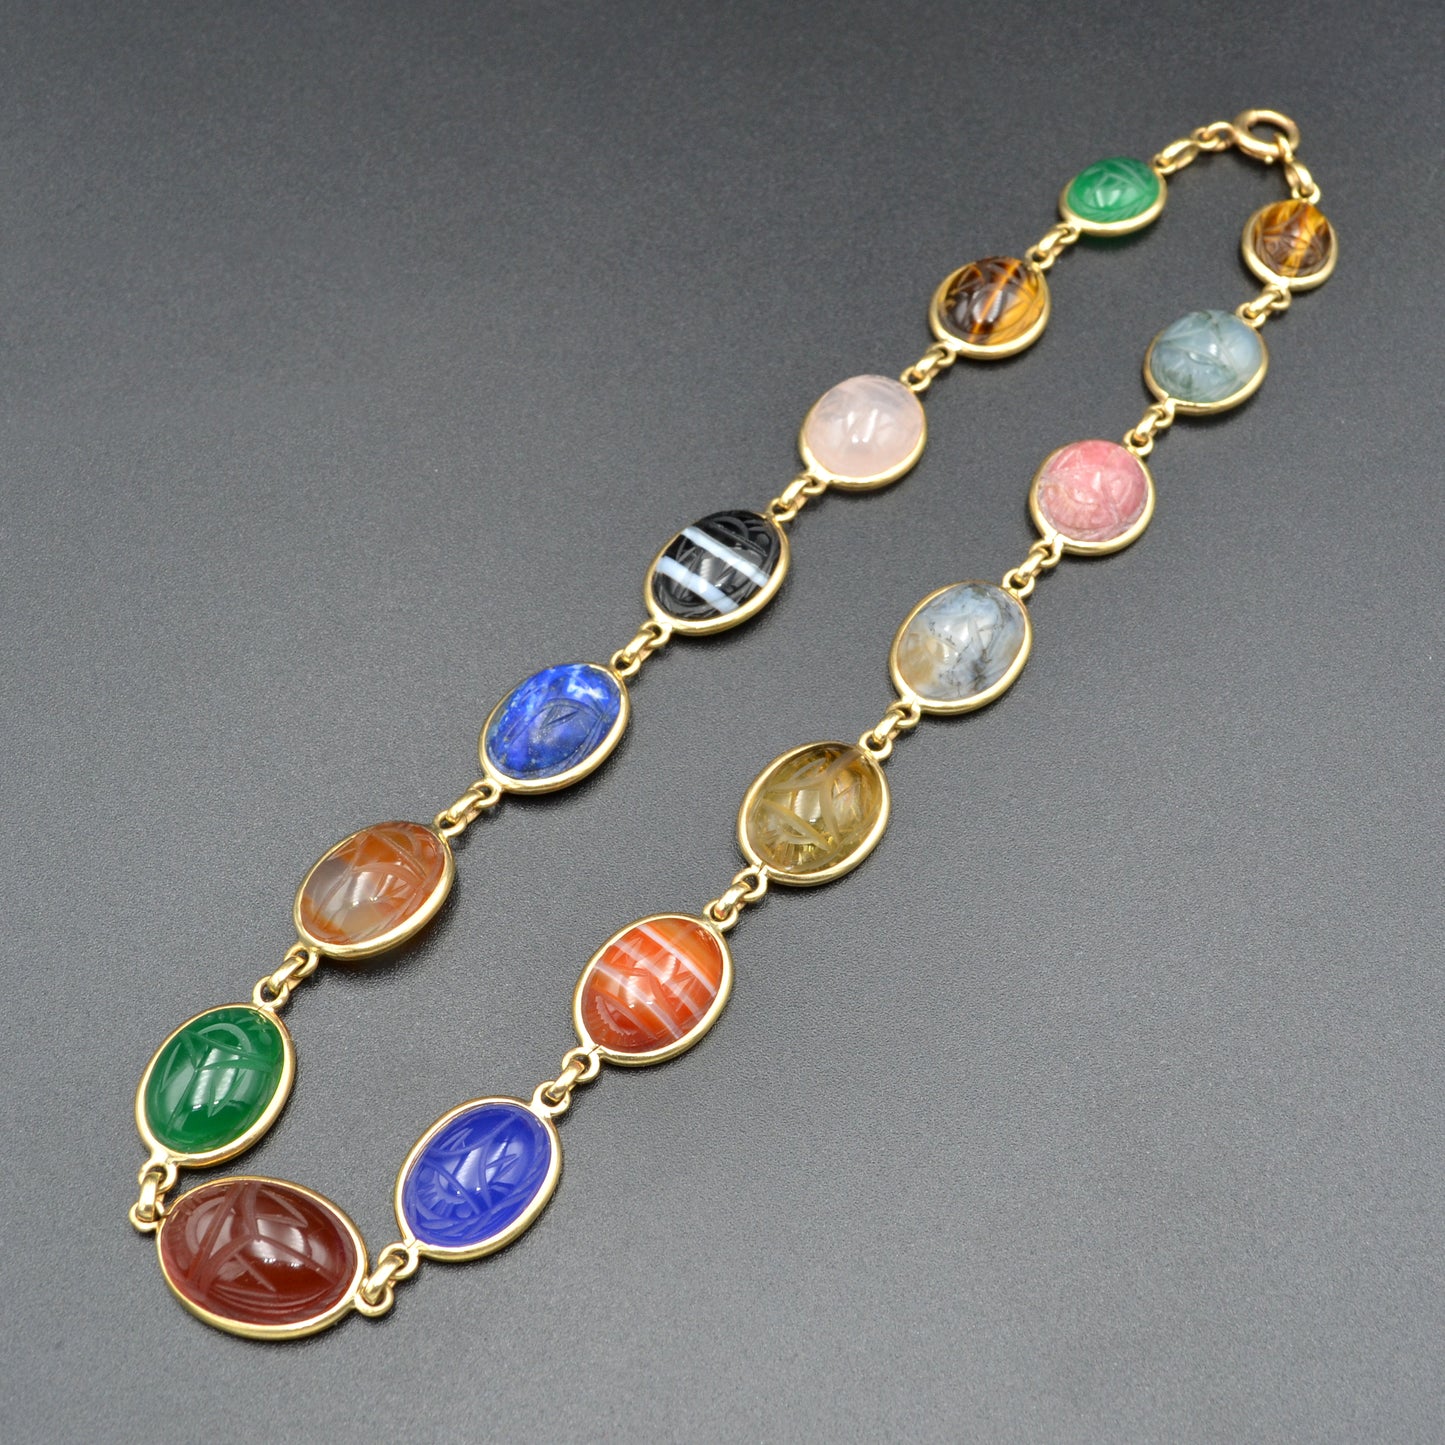 Vintage Egyptian Revival Gemstone Scarab and 14k Gold Collar Necklace